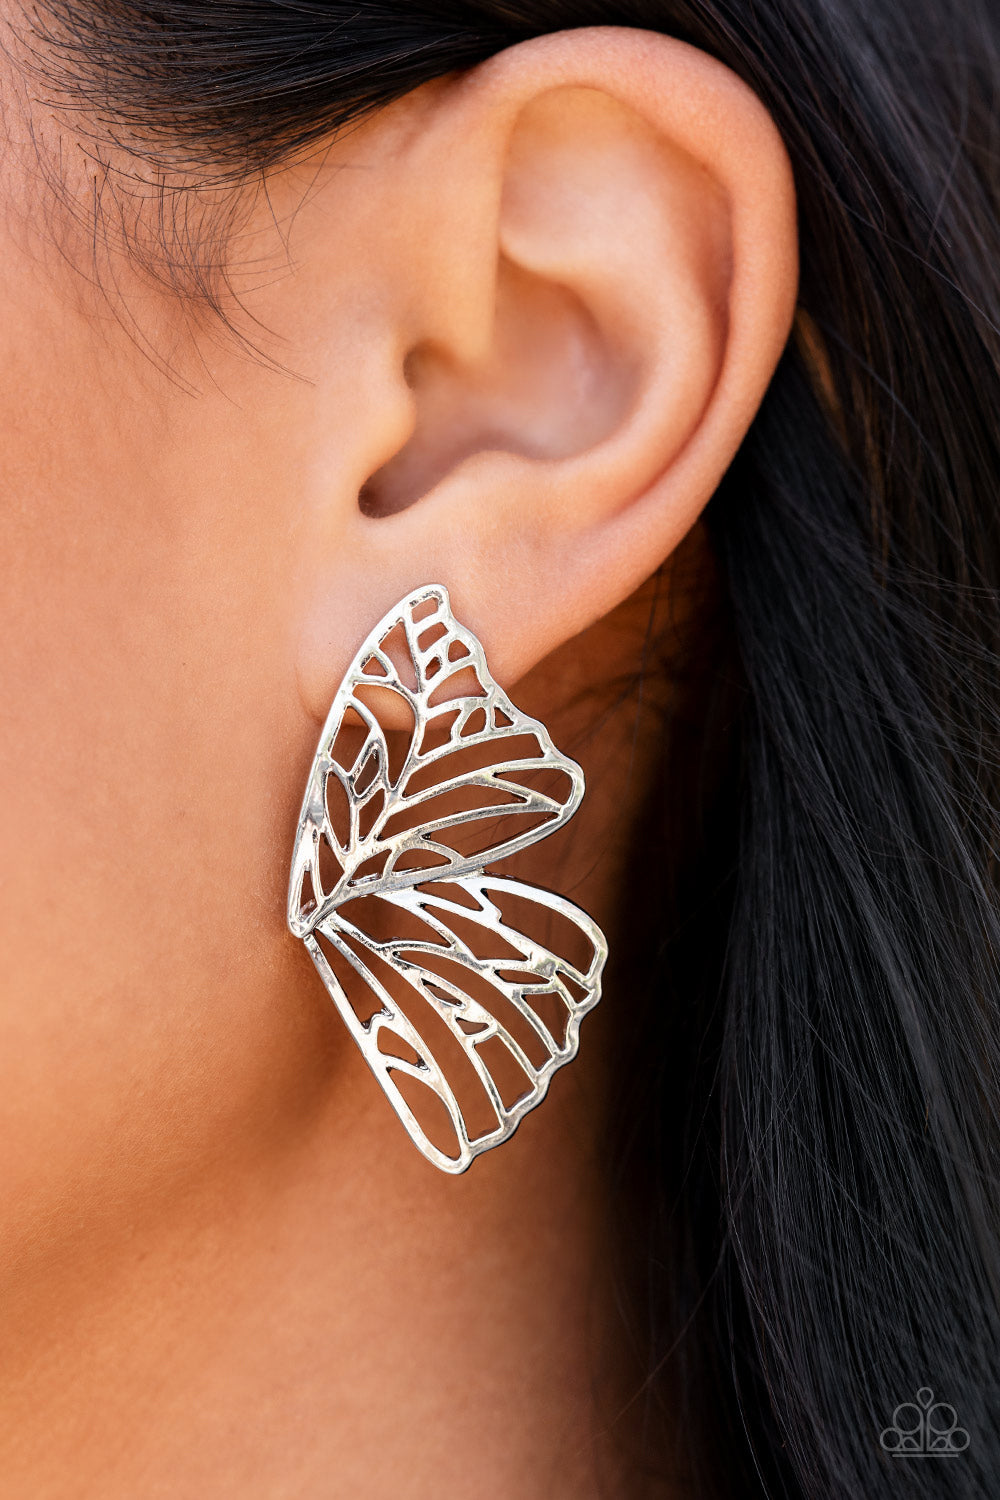 Butterfly Frills - Silver - Earrings - Paparazzi Accessories